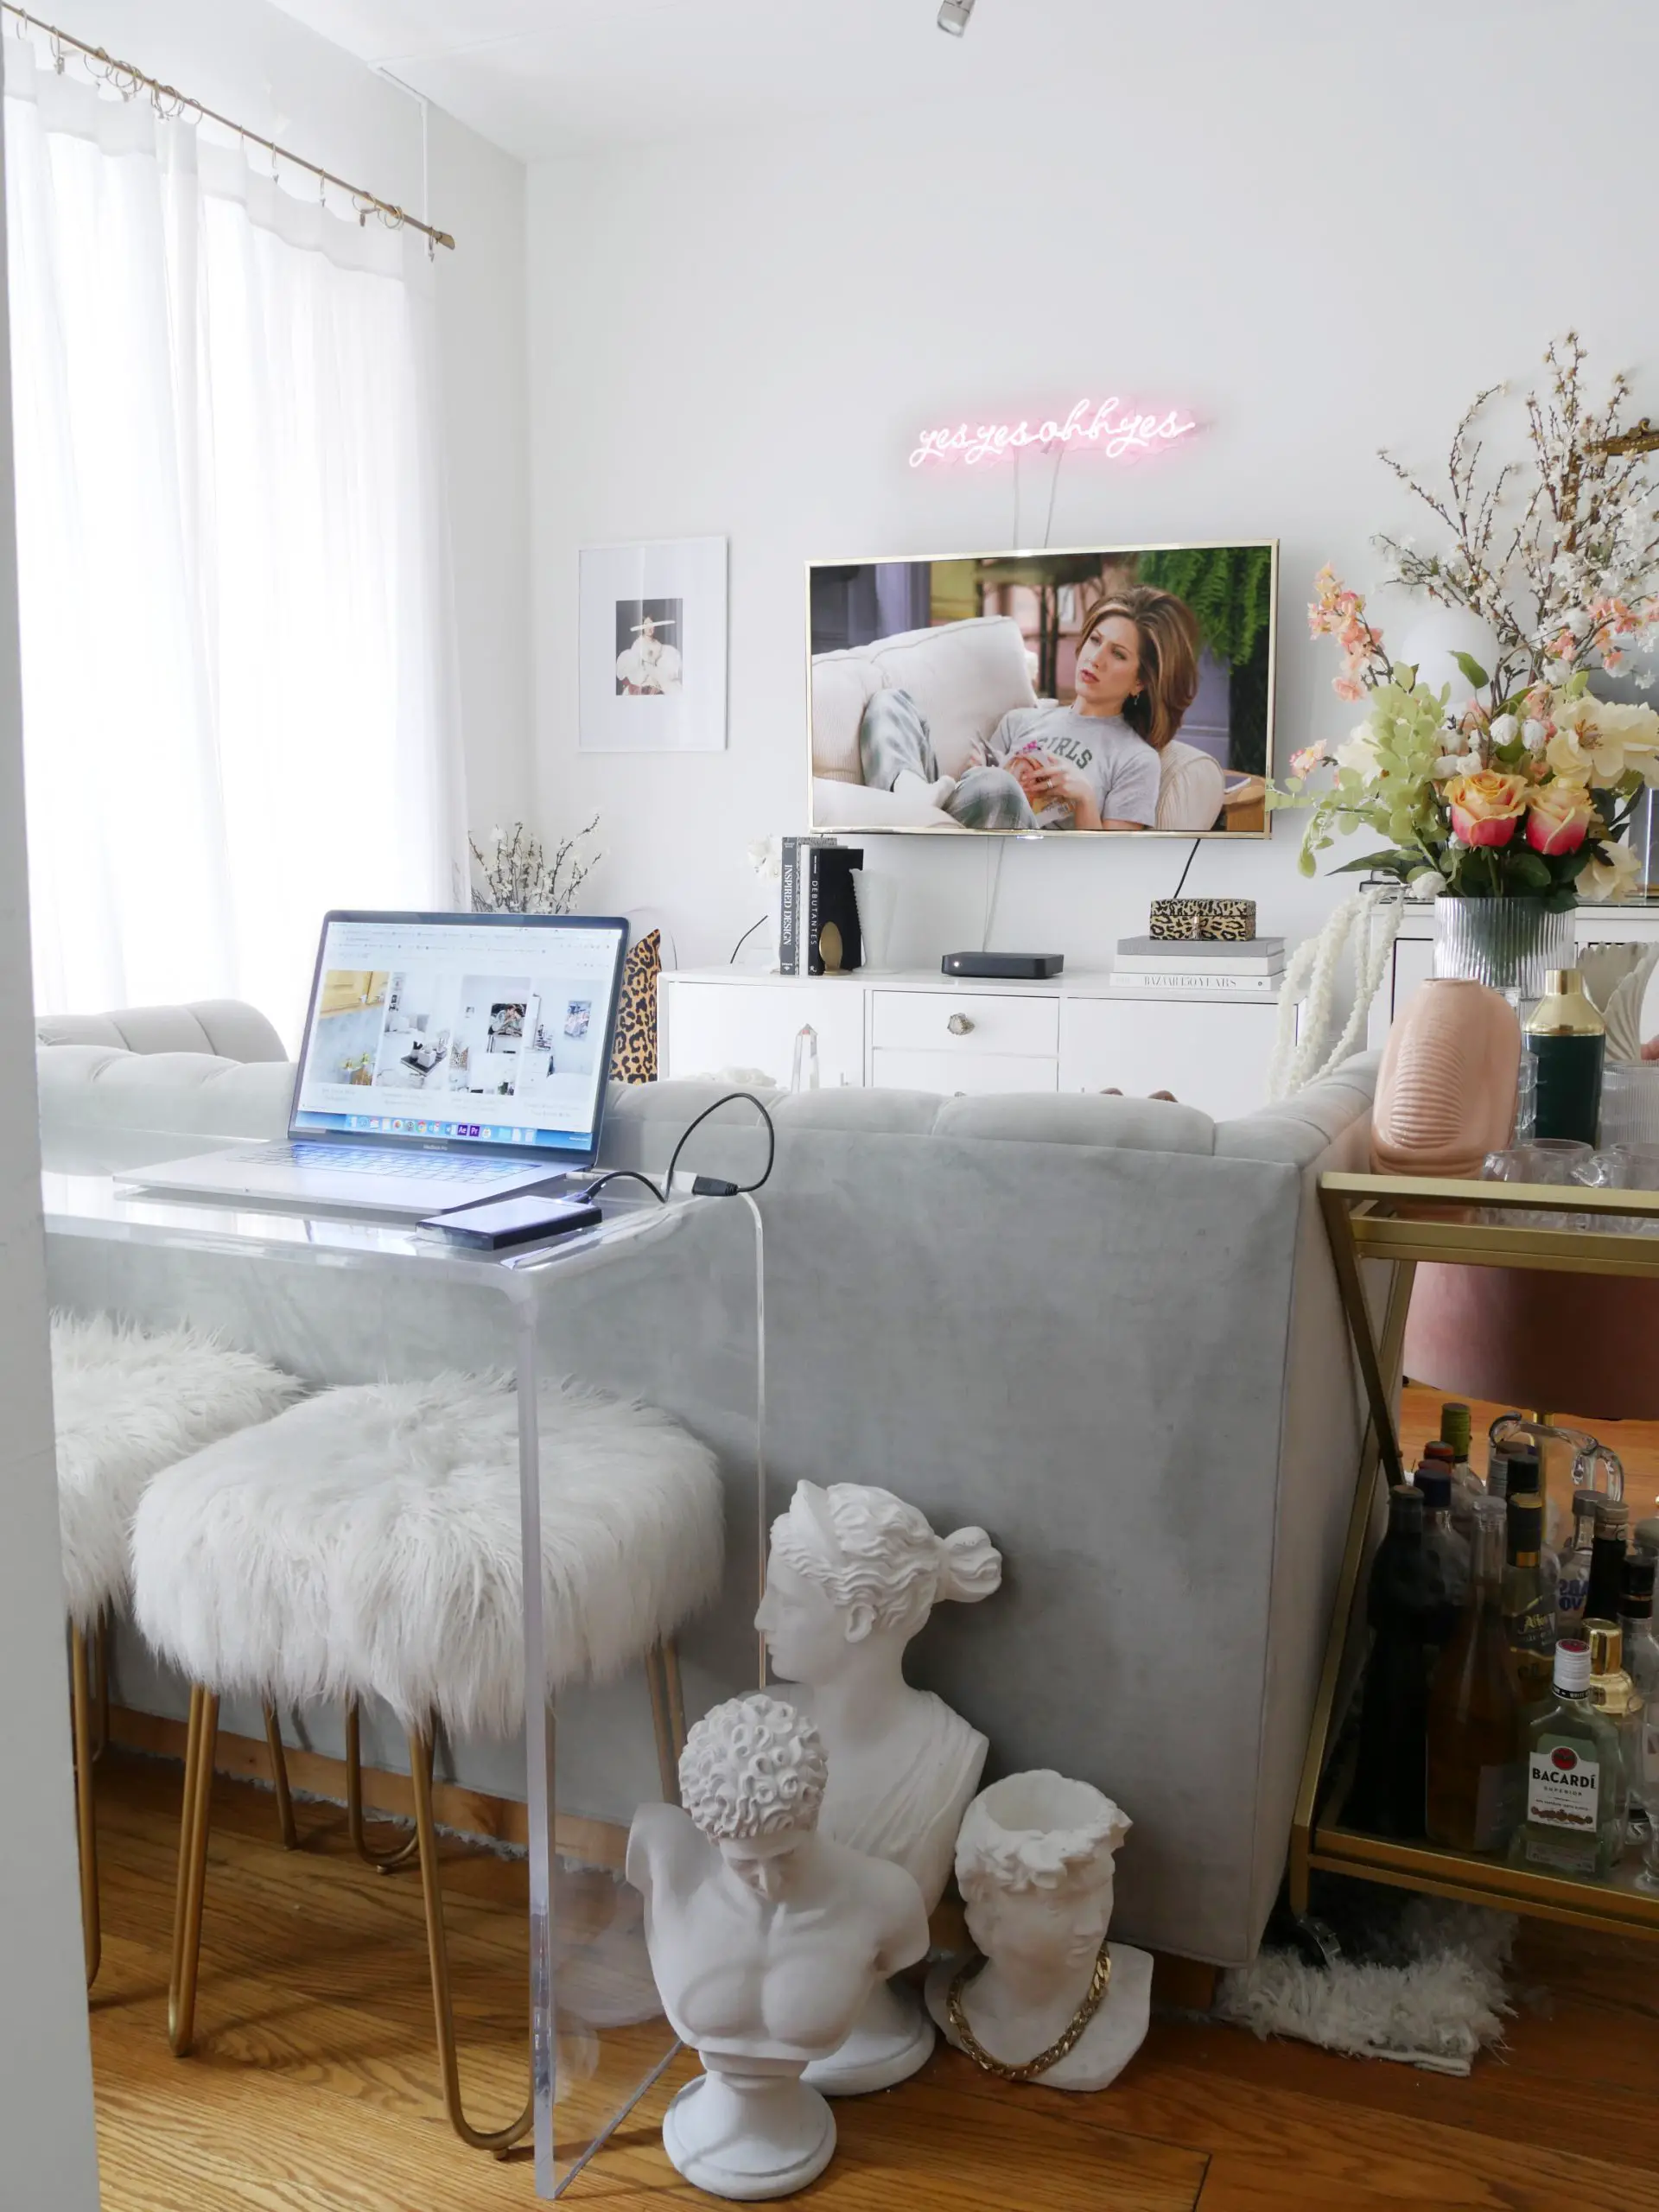 How to Create a Home Office in a Studio or Small Apartment - City Chic Decor